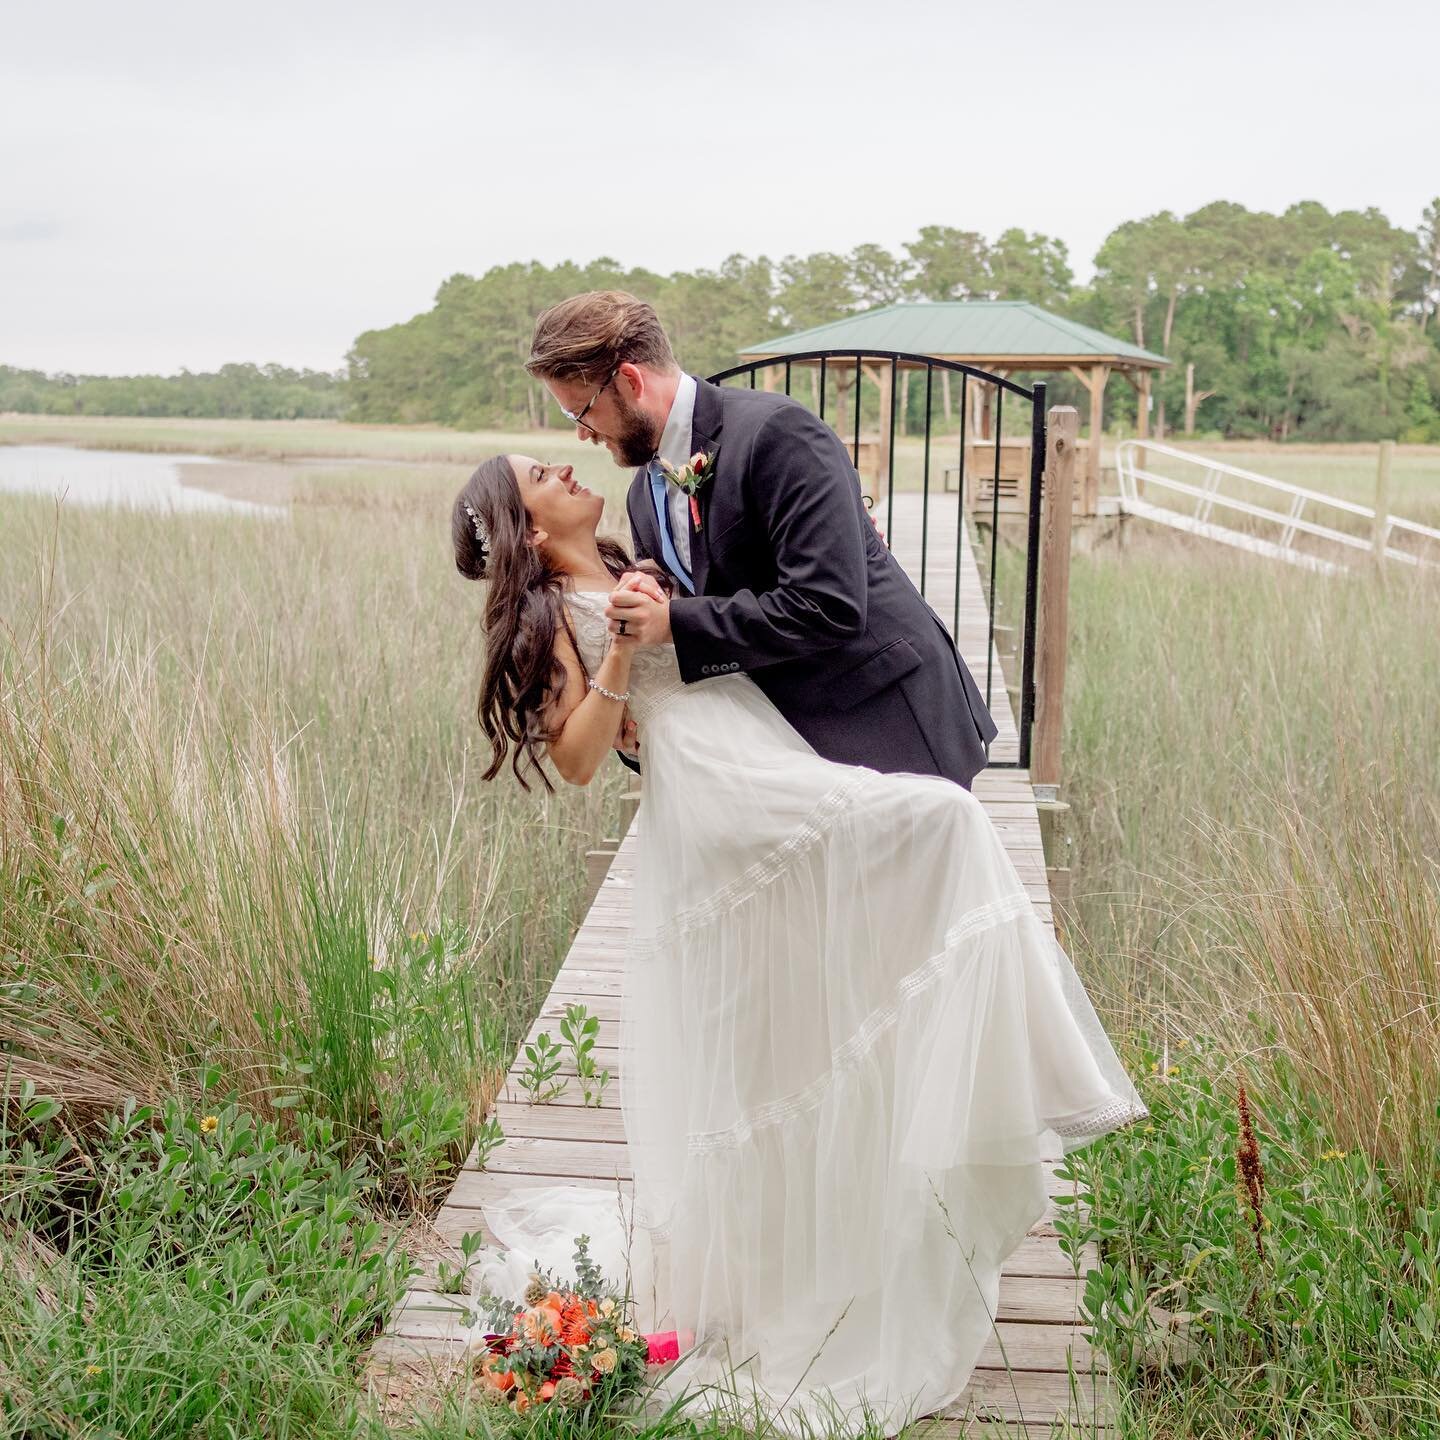 One week married and forever to go! Congratulations! All of your sweet and romantic traditions you shared were beautiful! 
.
.
@custom_vows_by_casey 
 @bwedcharleston 
@creechs.florist 
@livewilderstudio 
@awhitehousewedding 

#JustElopeCharleston #E